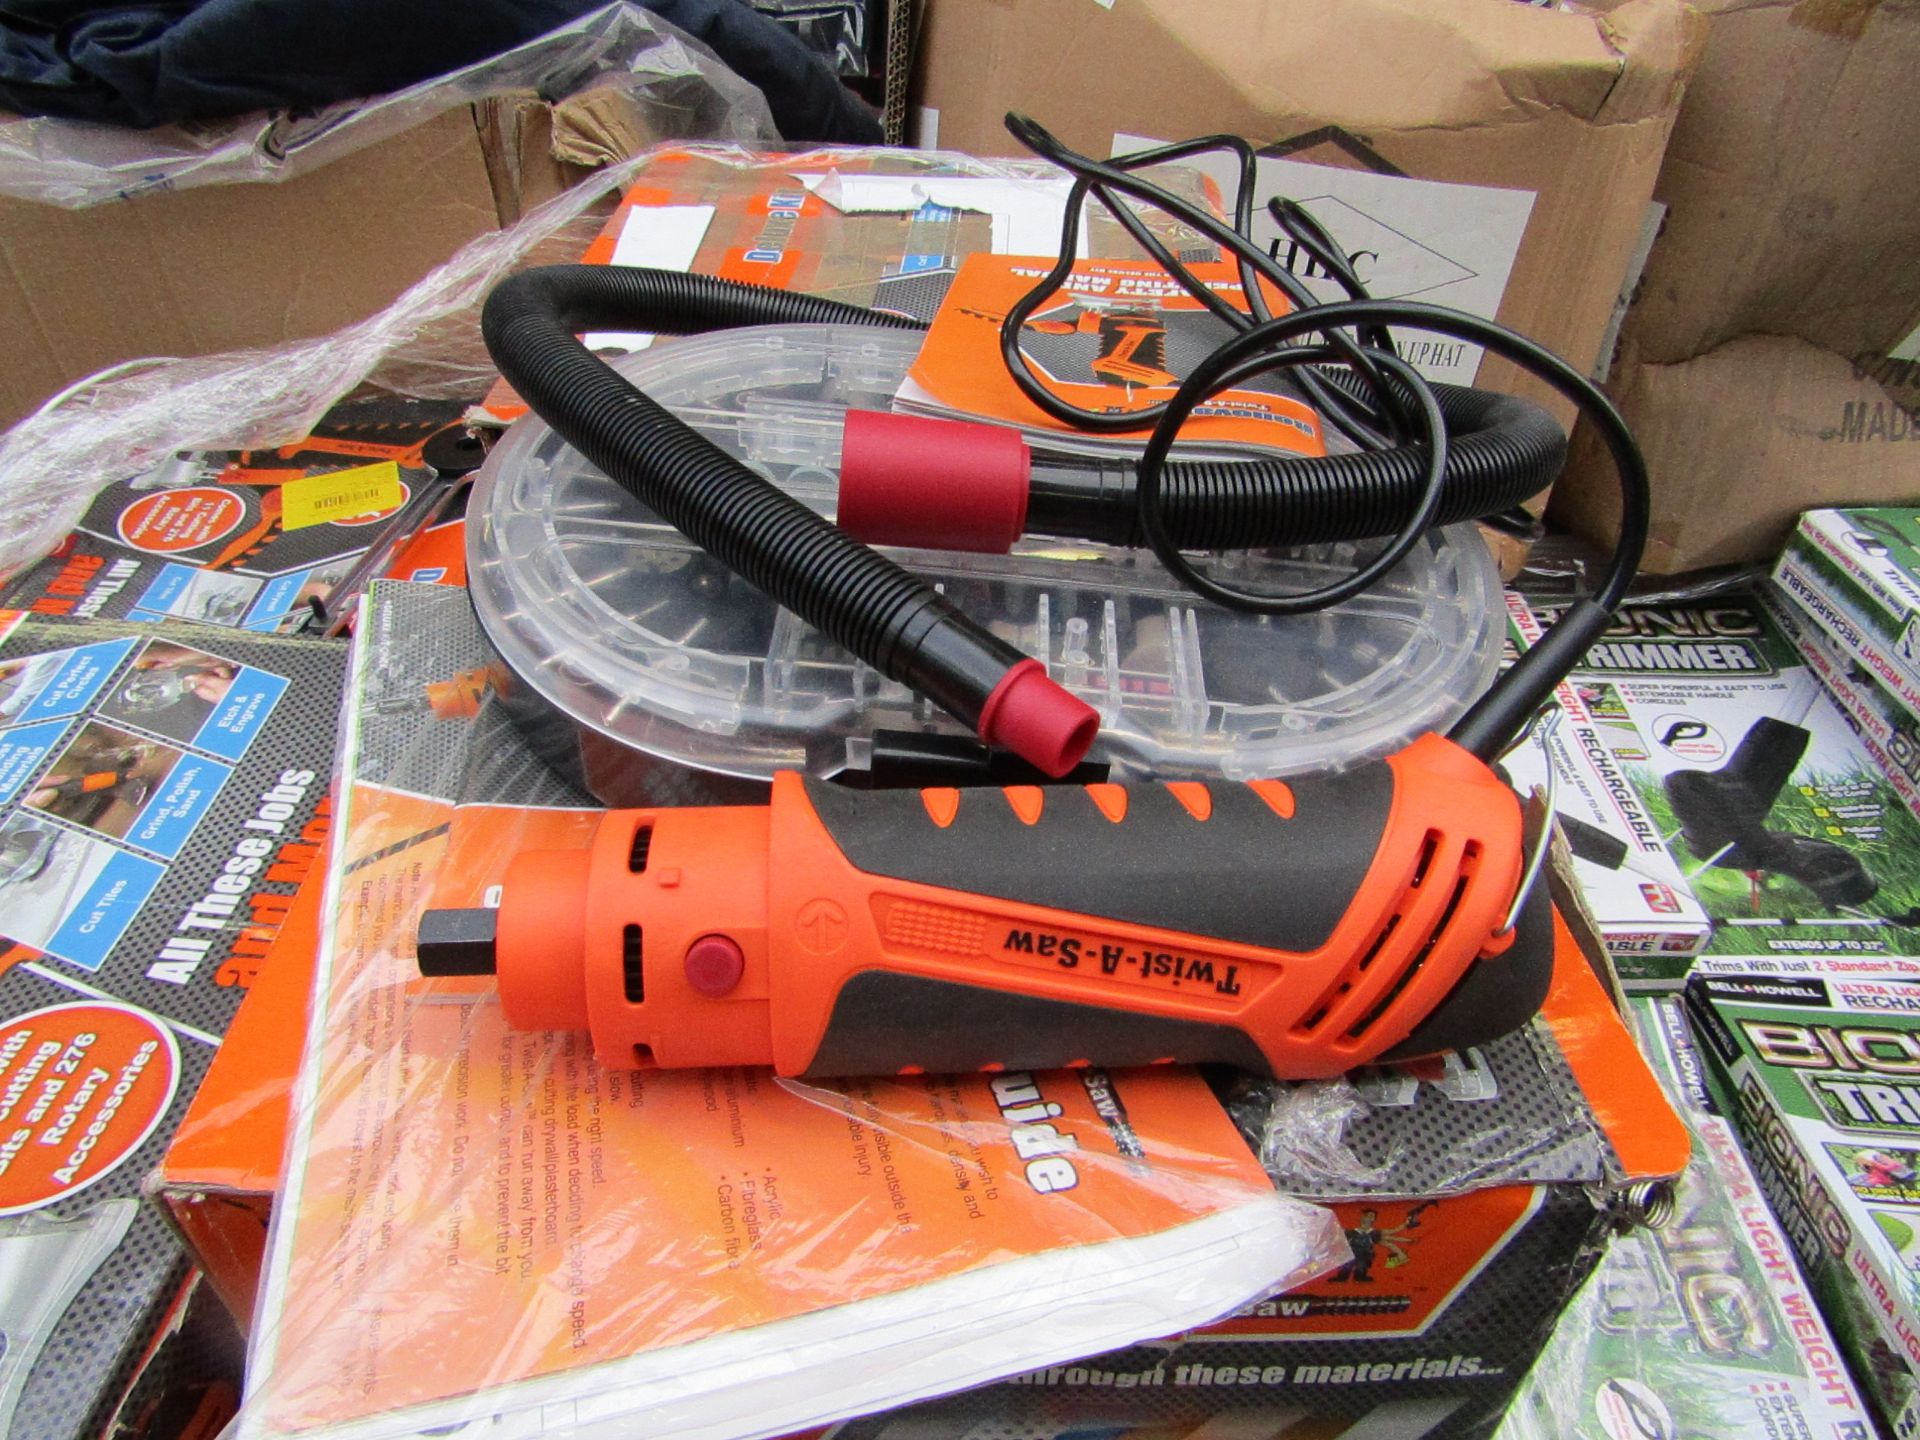 | 1x | The Renovator Twist-a-Saw Deluxe Kit | Tested working and boxed (we havent checked all